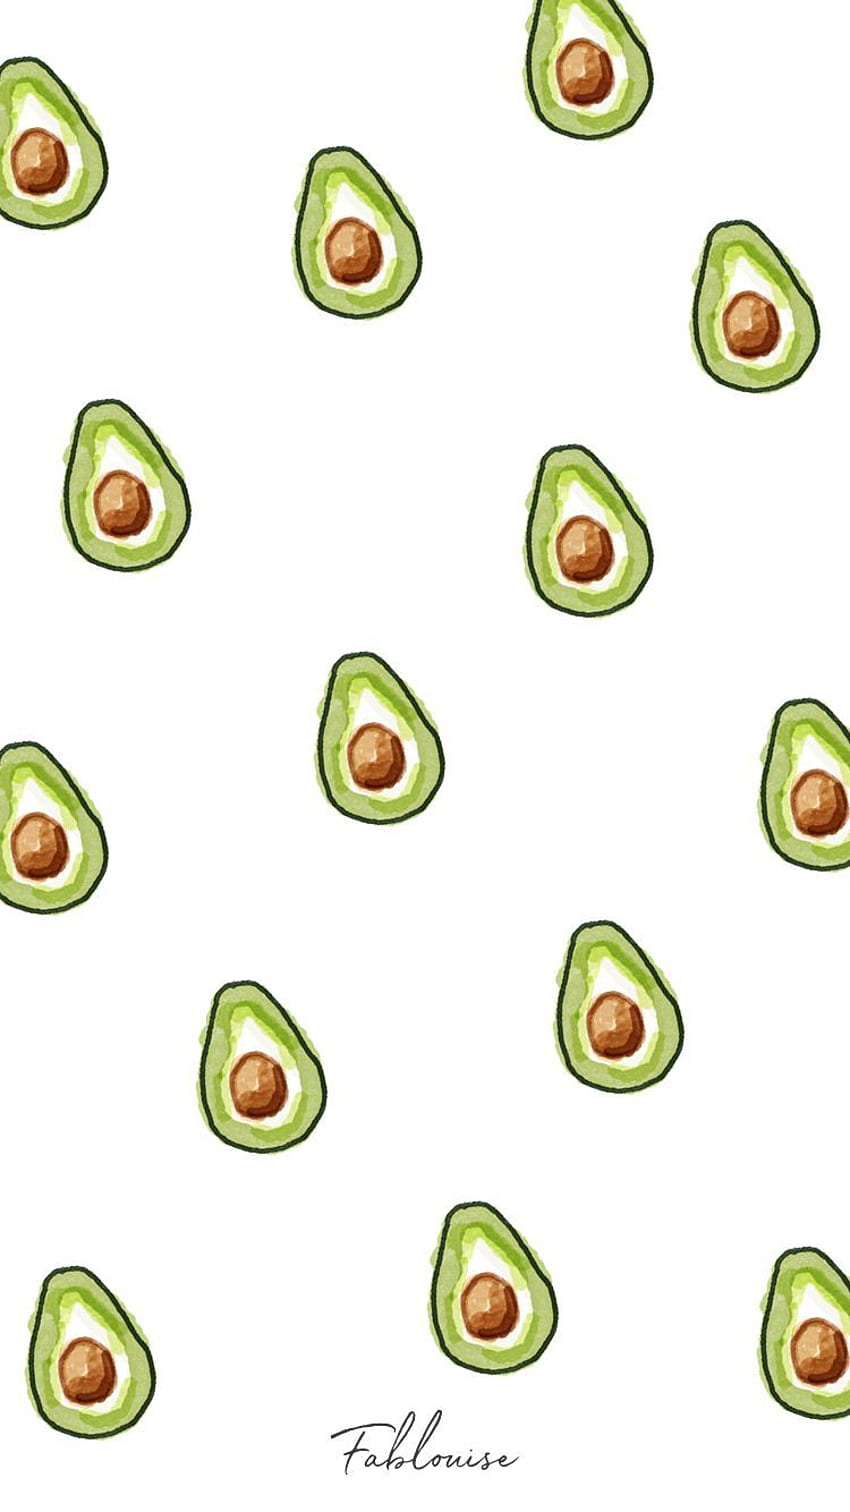 IPhone wallpaper with a pattern of avocado halves - Avocado